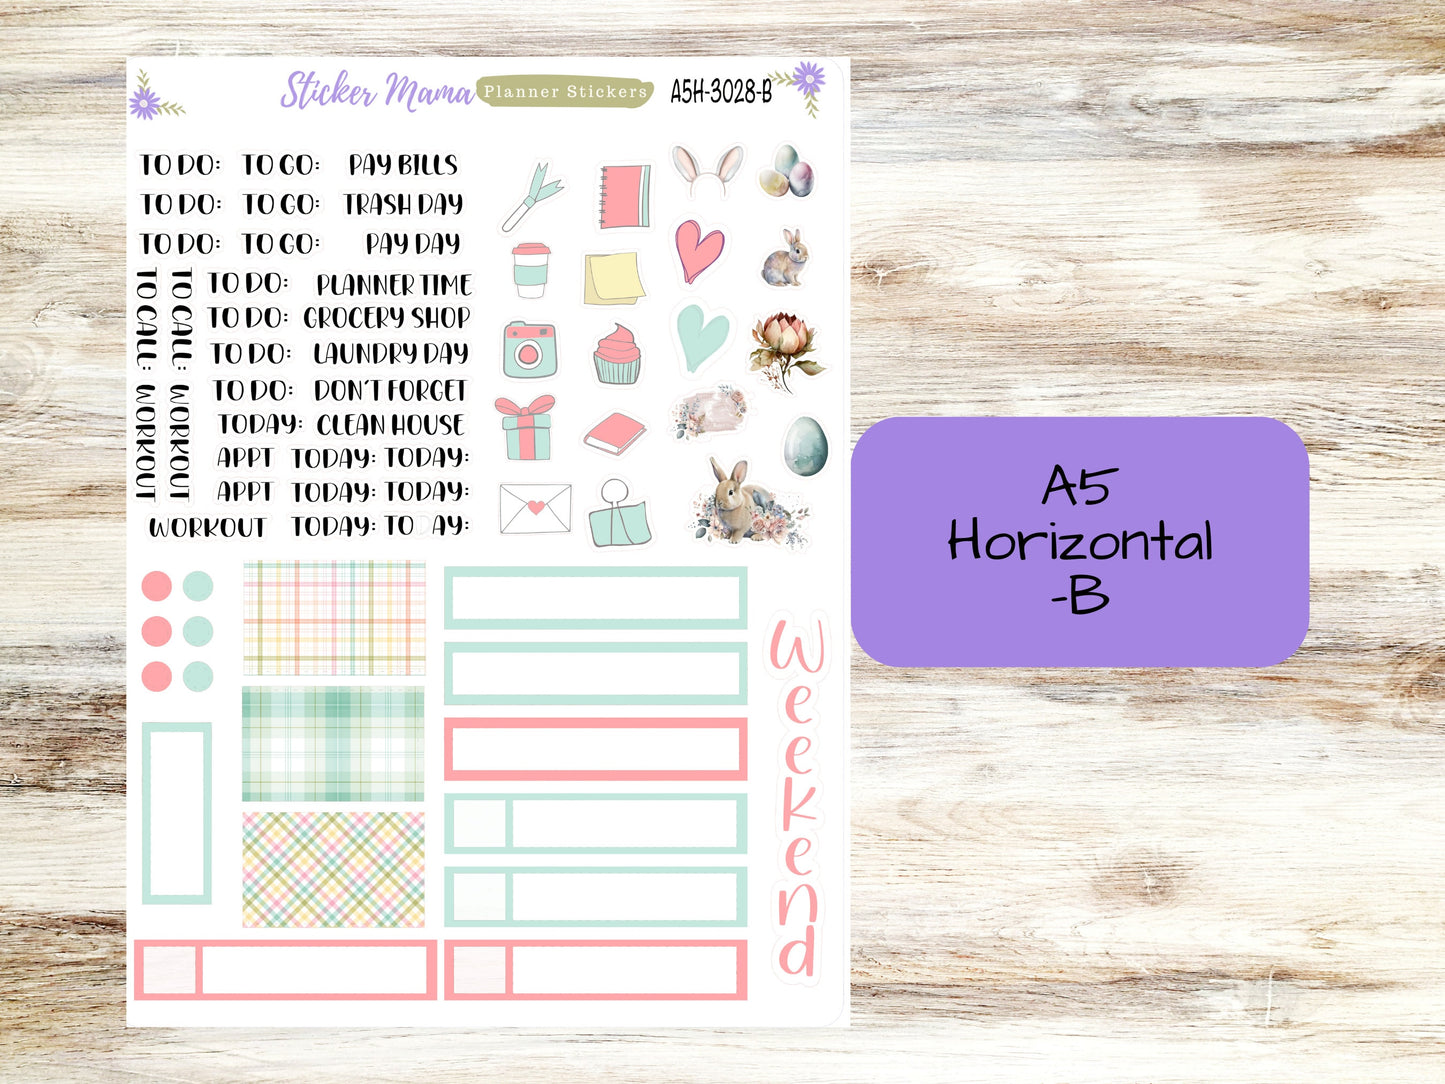 A5 Horizontal || #3028 || Easter Spring Plaid  || A5 Weekly Kit || Planner Stickers || Erin Condren A5 Horizontal Weekly Kit